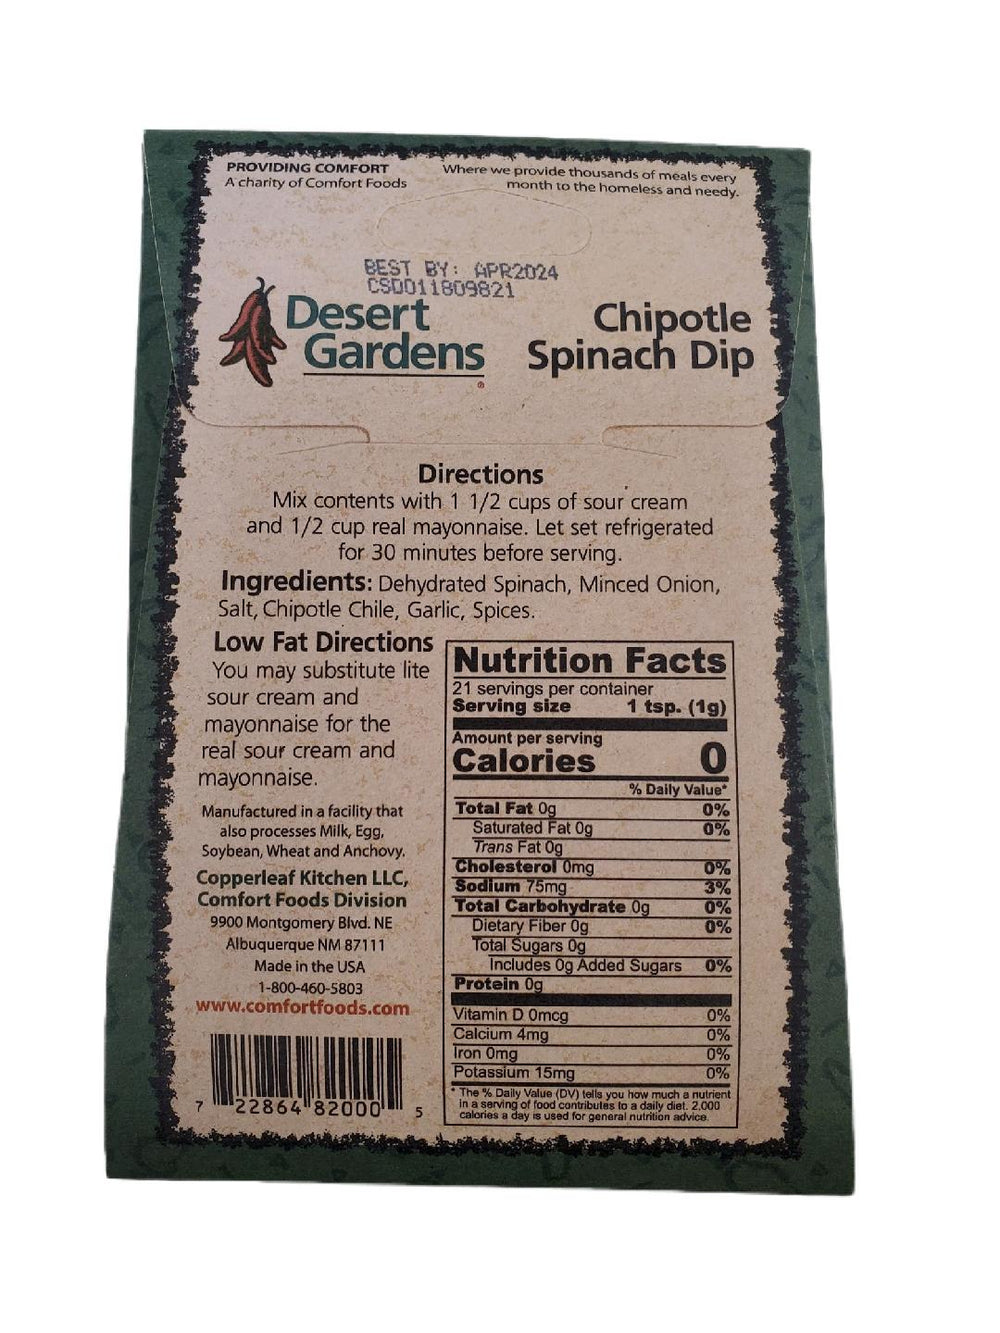 Desert Gardens Chipotle Spinach Dip Mix-#1 Ranked New Mexico Salsa &amp; Chile Powder | Made in New Mexico